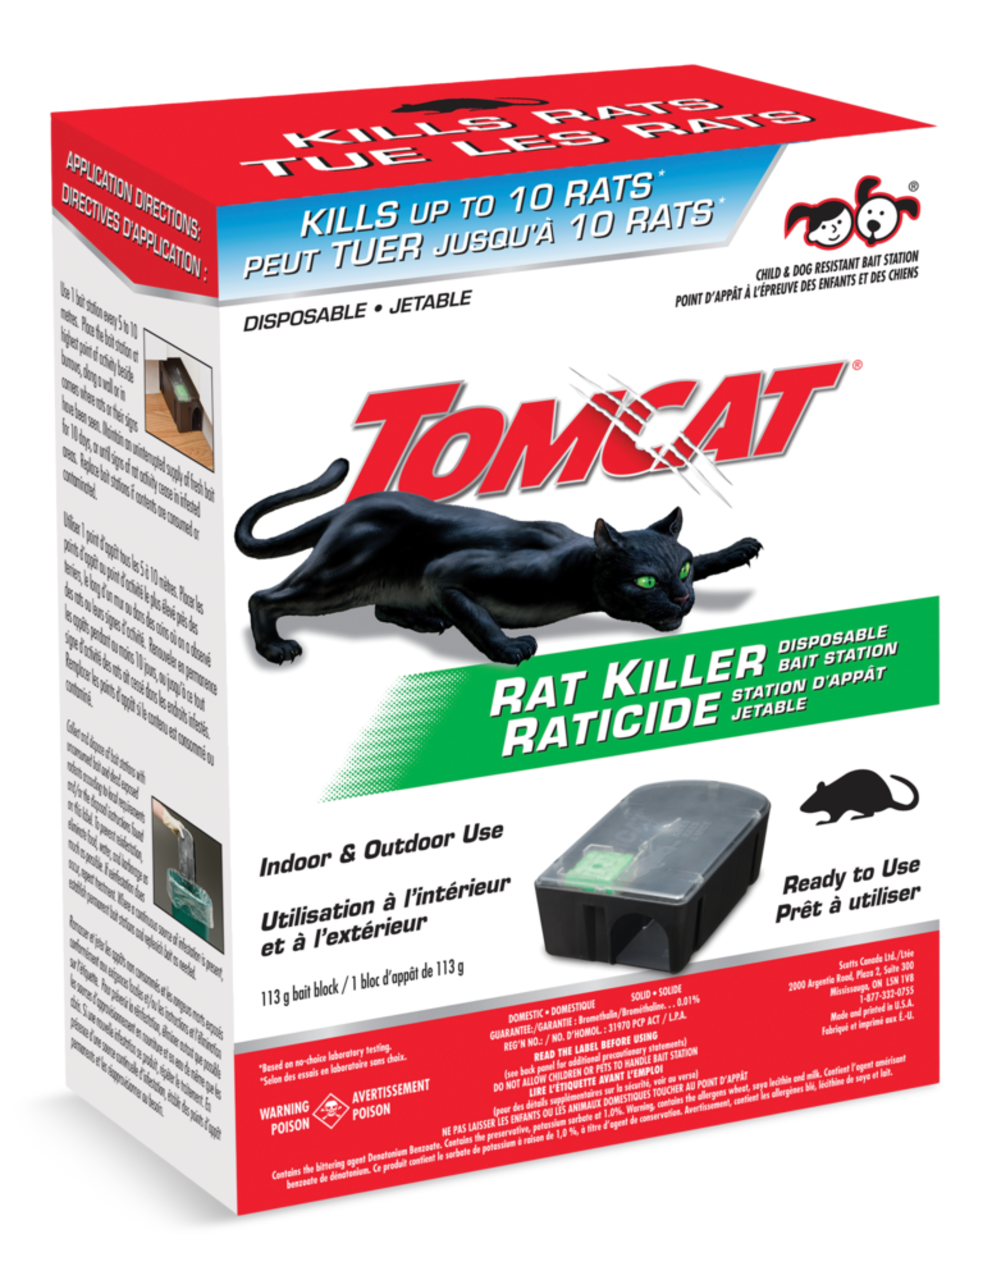 https://media-www.canadiantire.ca/product/seasonal-gardening/gardening/weed-insect-and-pest-control/0591693/tomcat-rat-killer-disposable-bait-station-c4b5499d-938e-4a48-a827-7ed81e5d888a.png?imdensity=1&imwidth=640&impolicy=mZoom